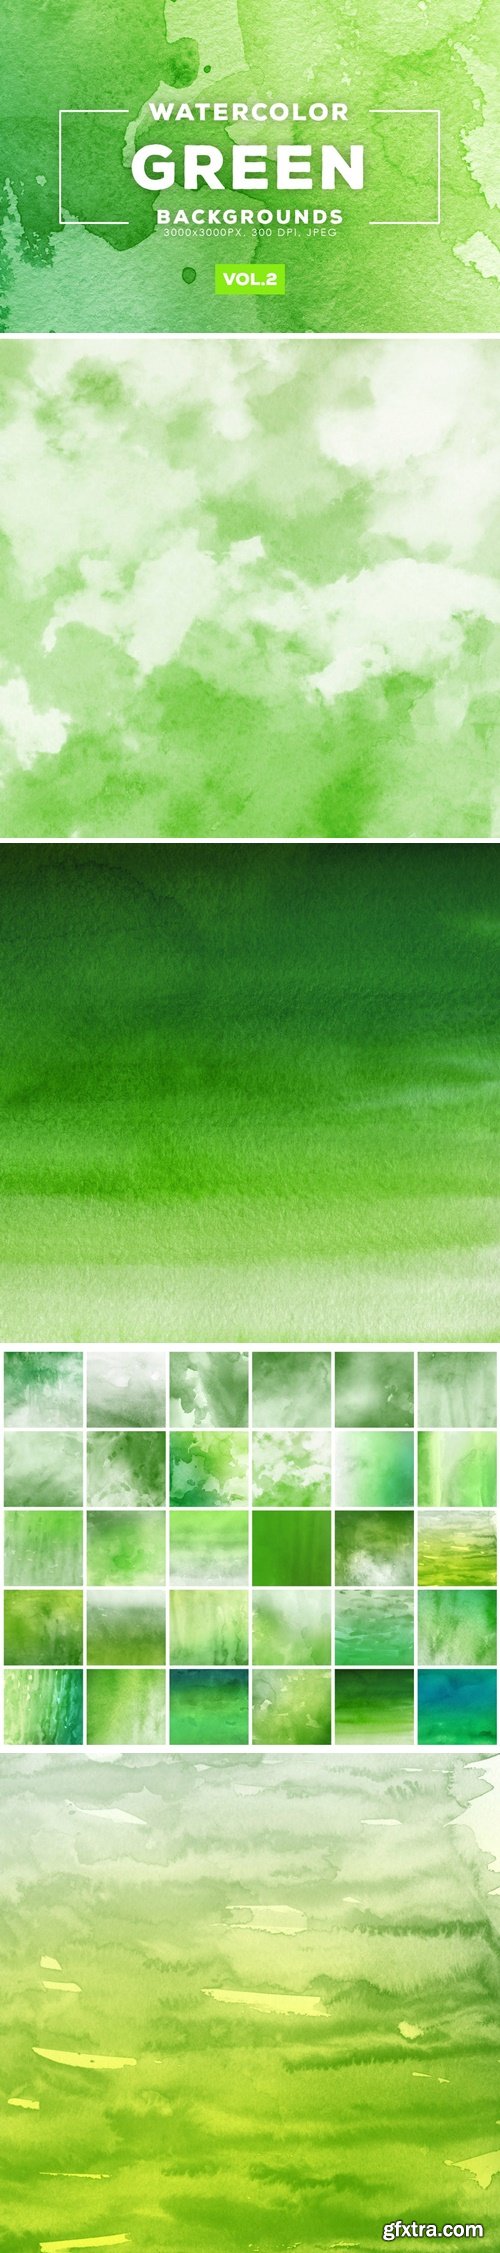 Watercolor Green Backgrounds Vol.2